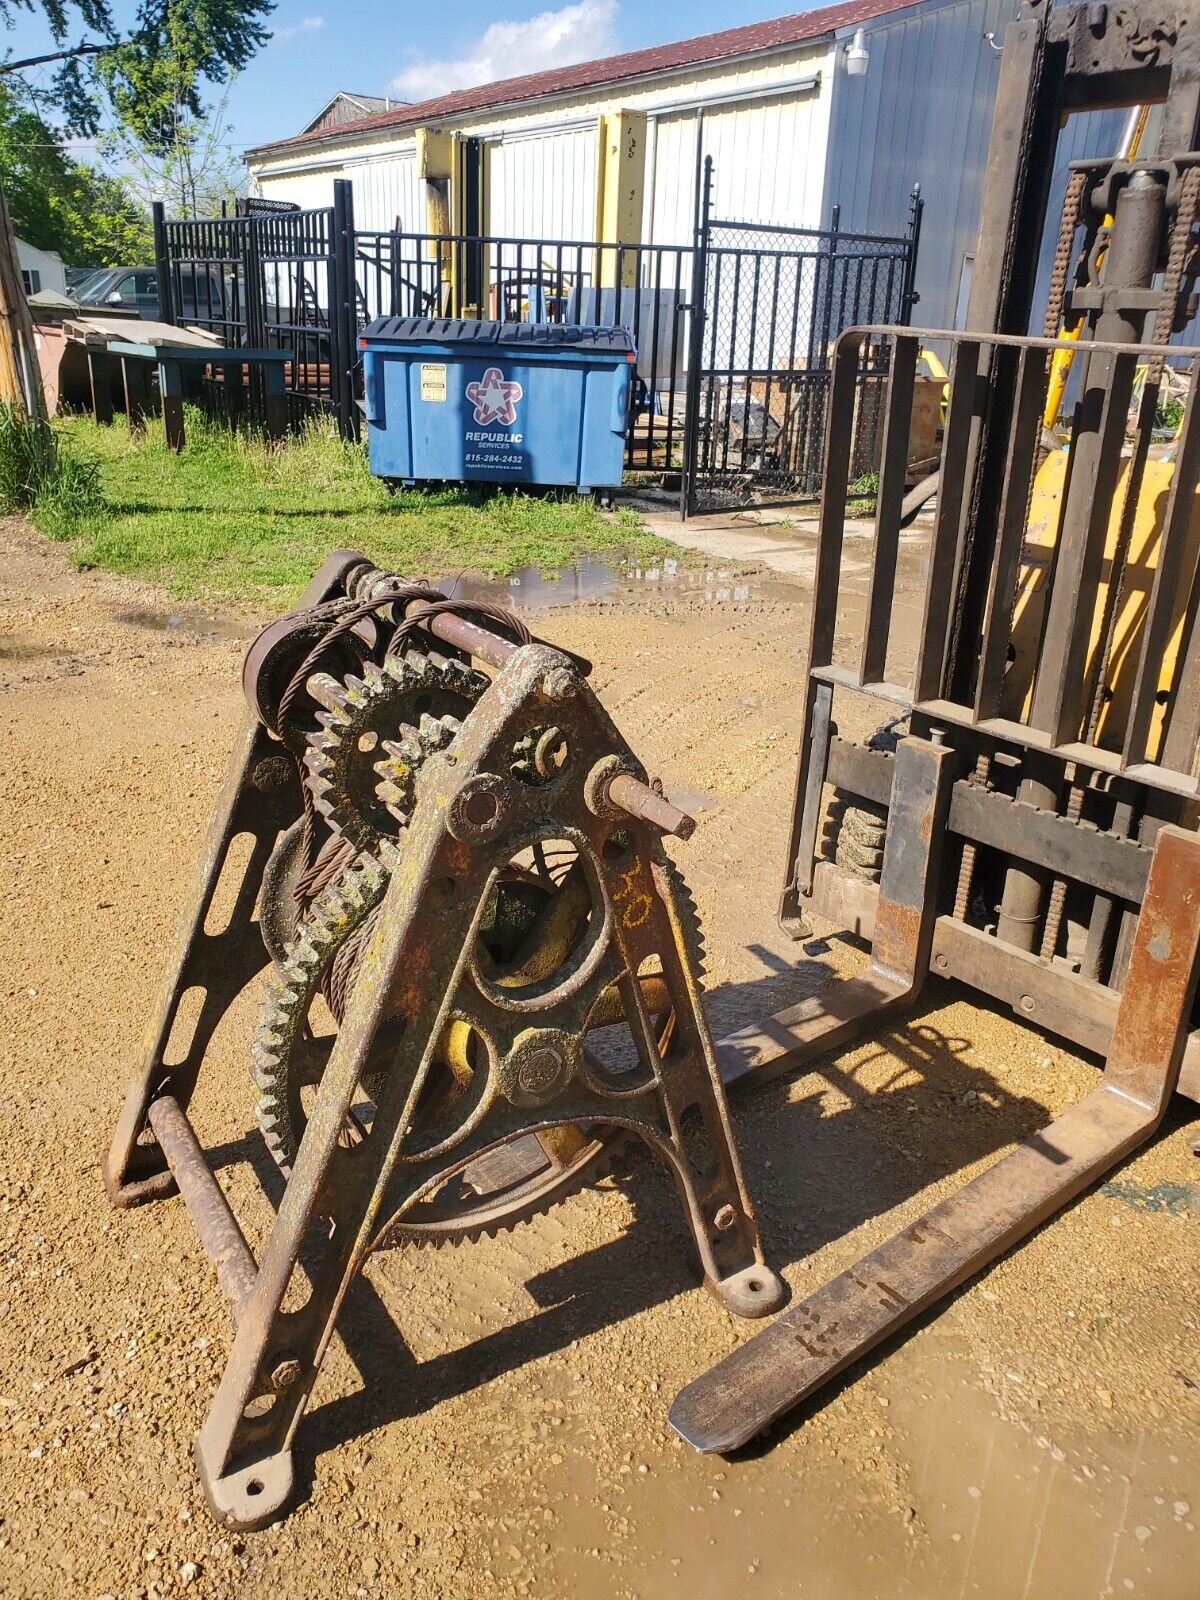 Vintage Winch Crane Winch LOCK AND DAM Gate Winch Large Cable WINCH Restore